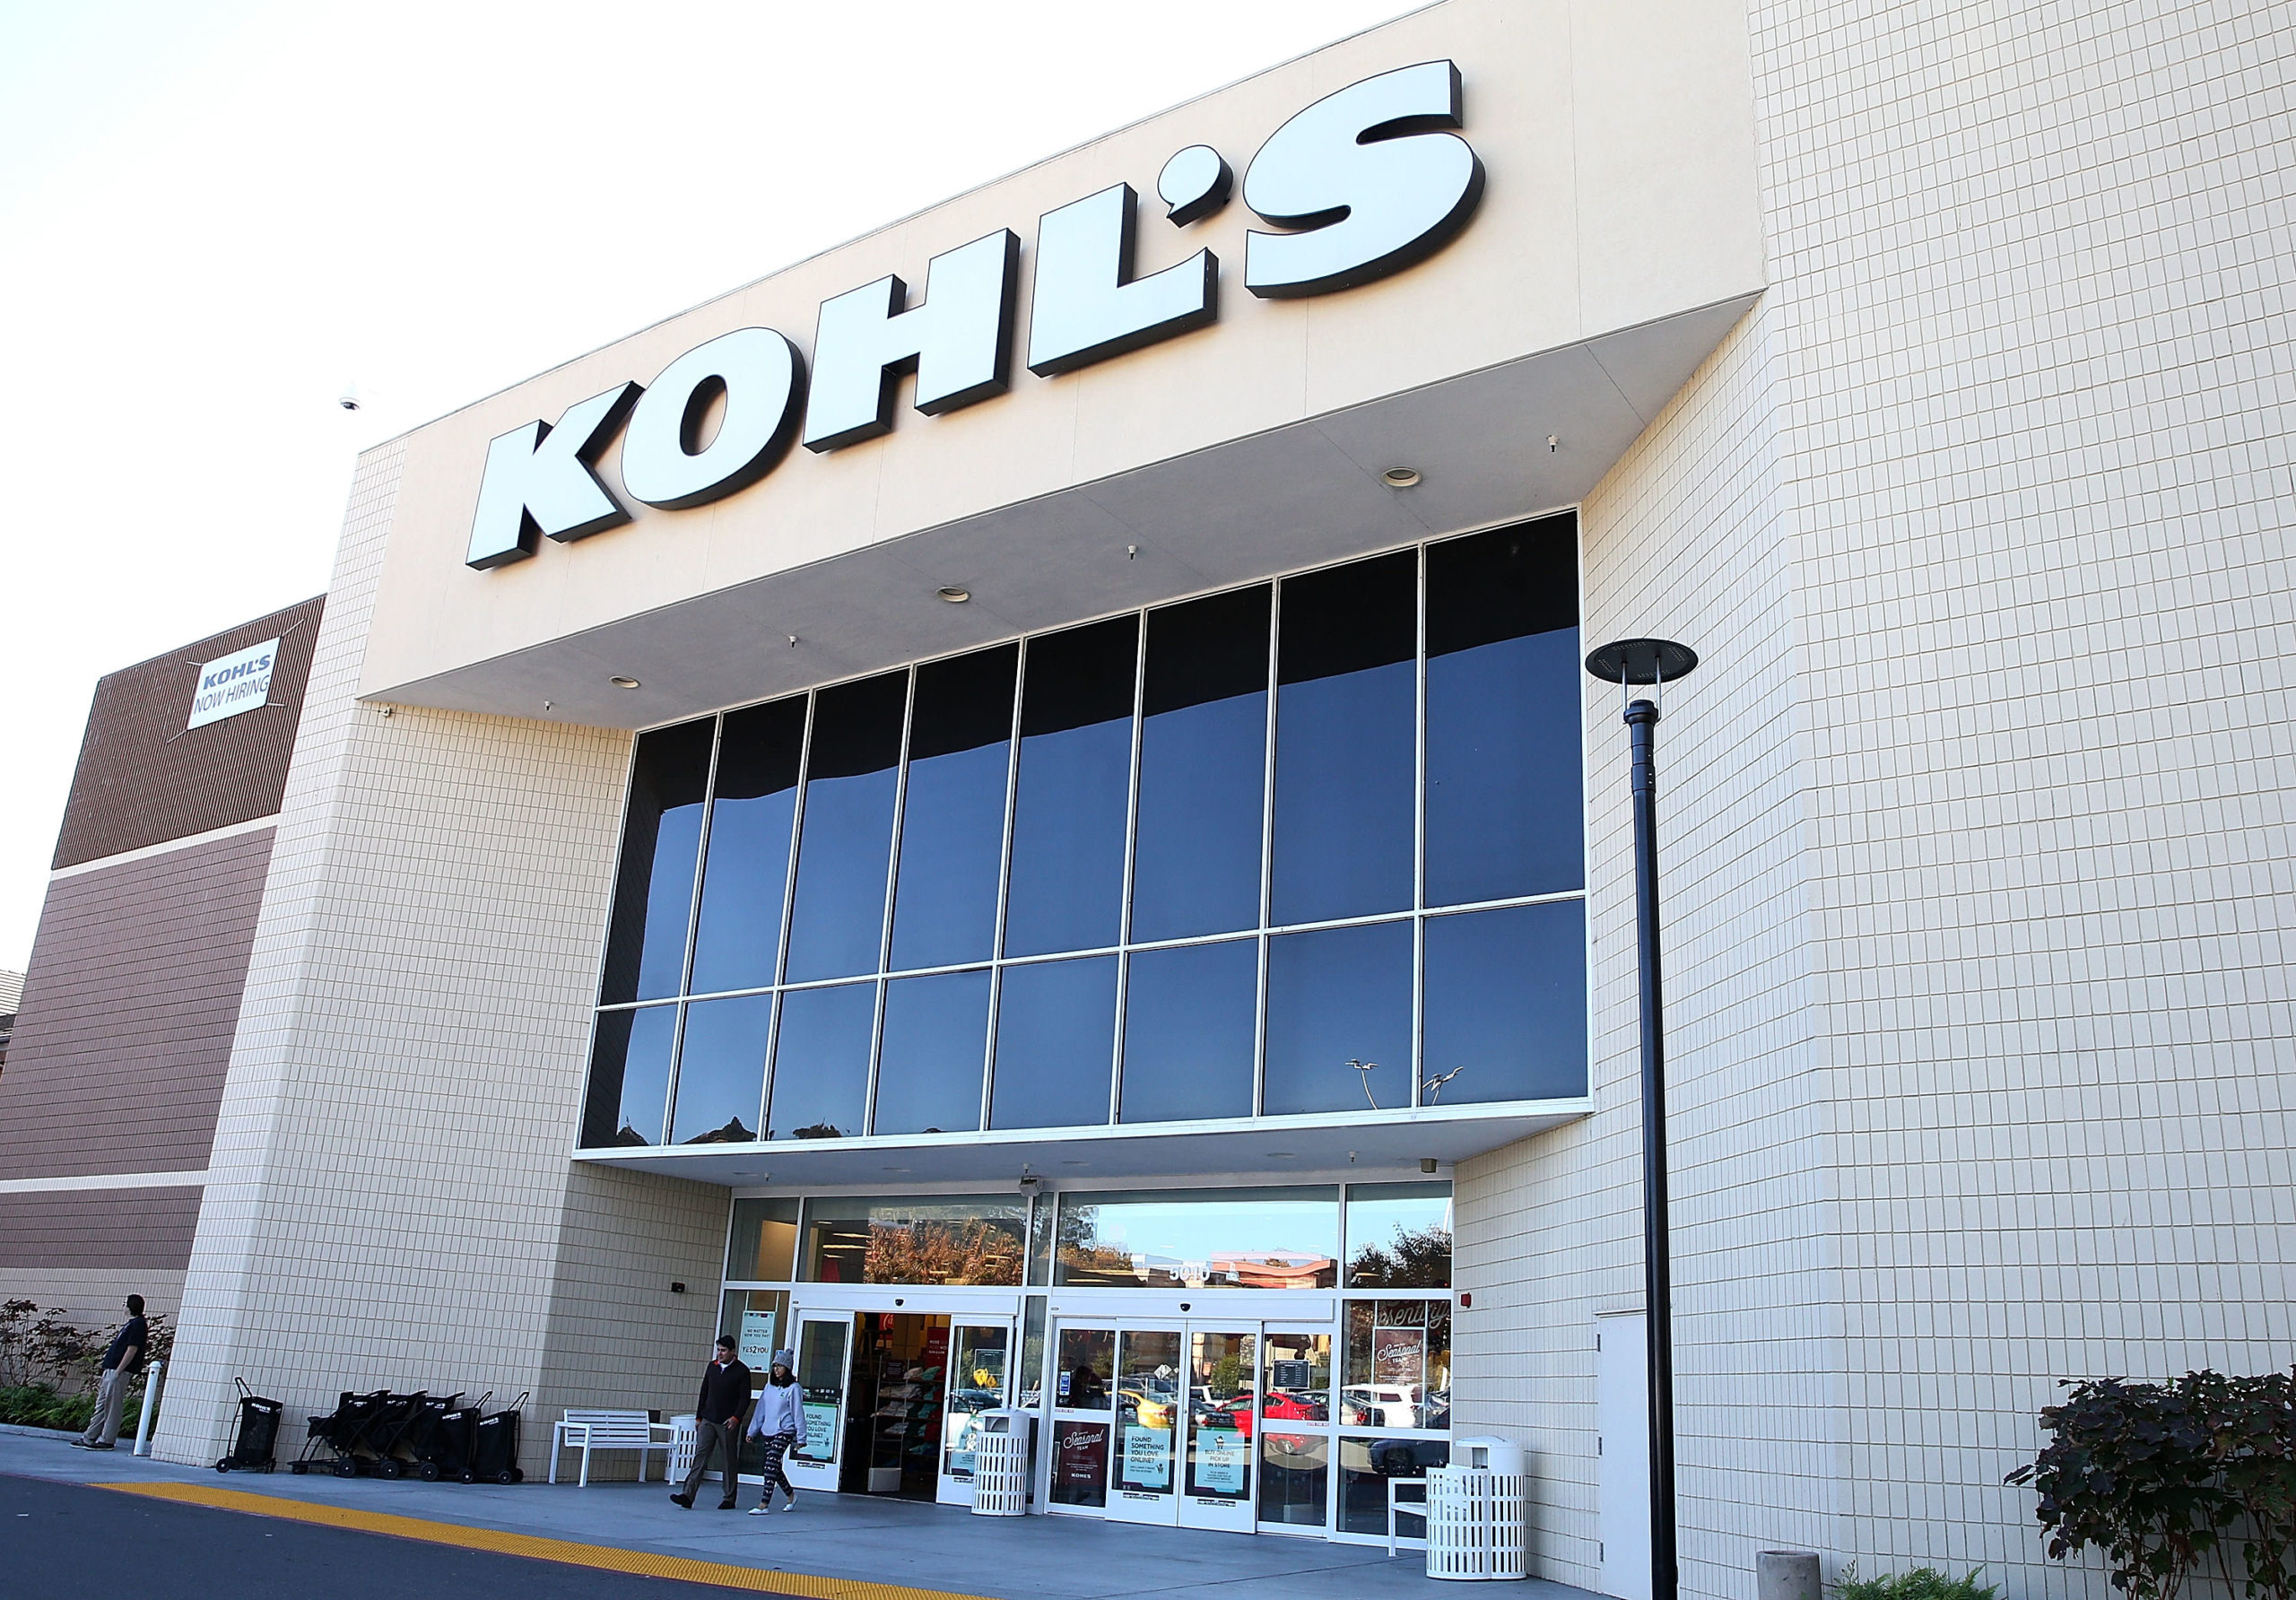 Kohl’s sees billions in market share free as retailers go bankrupt